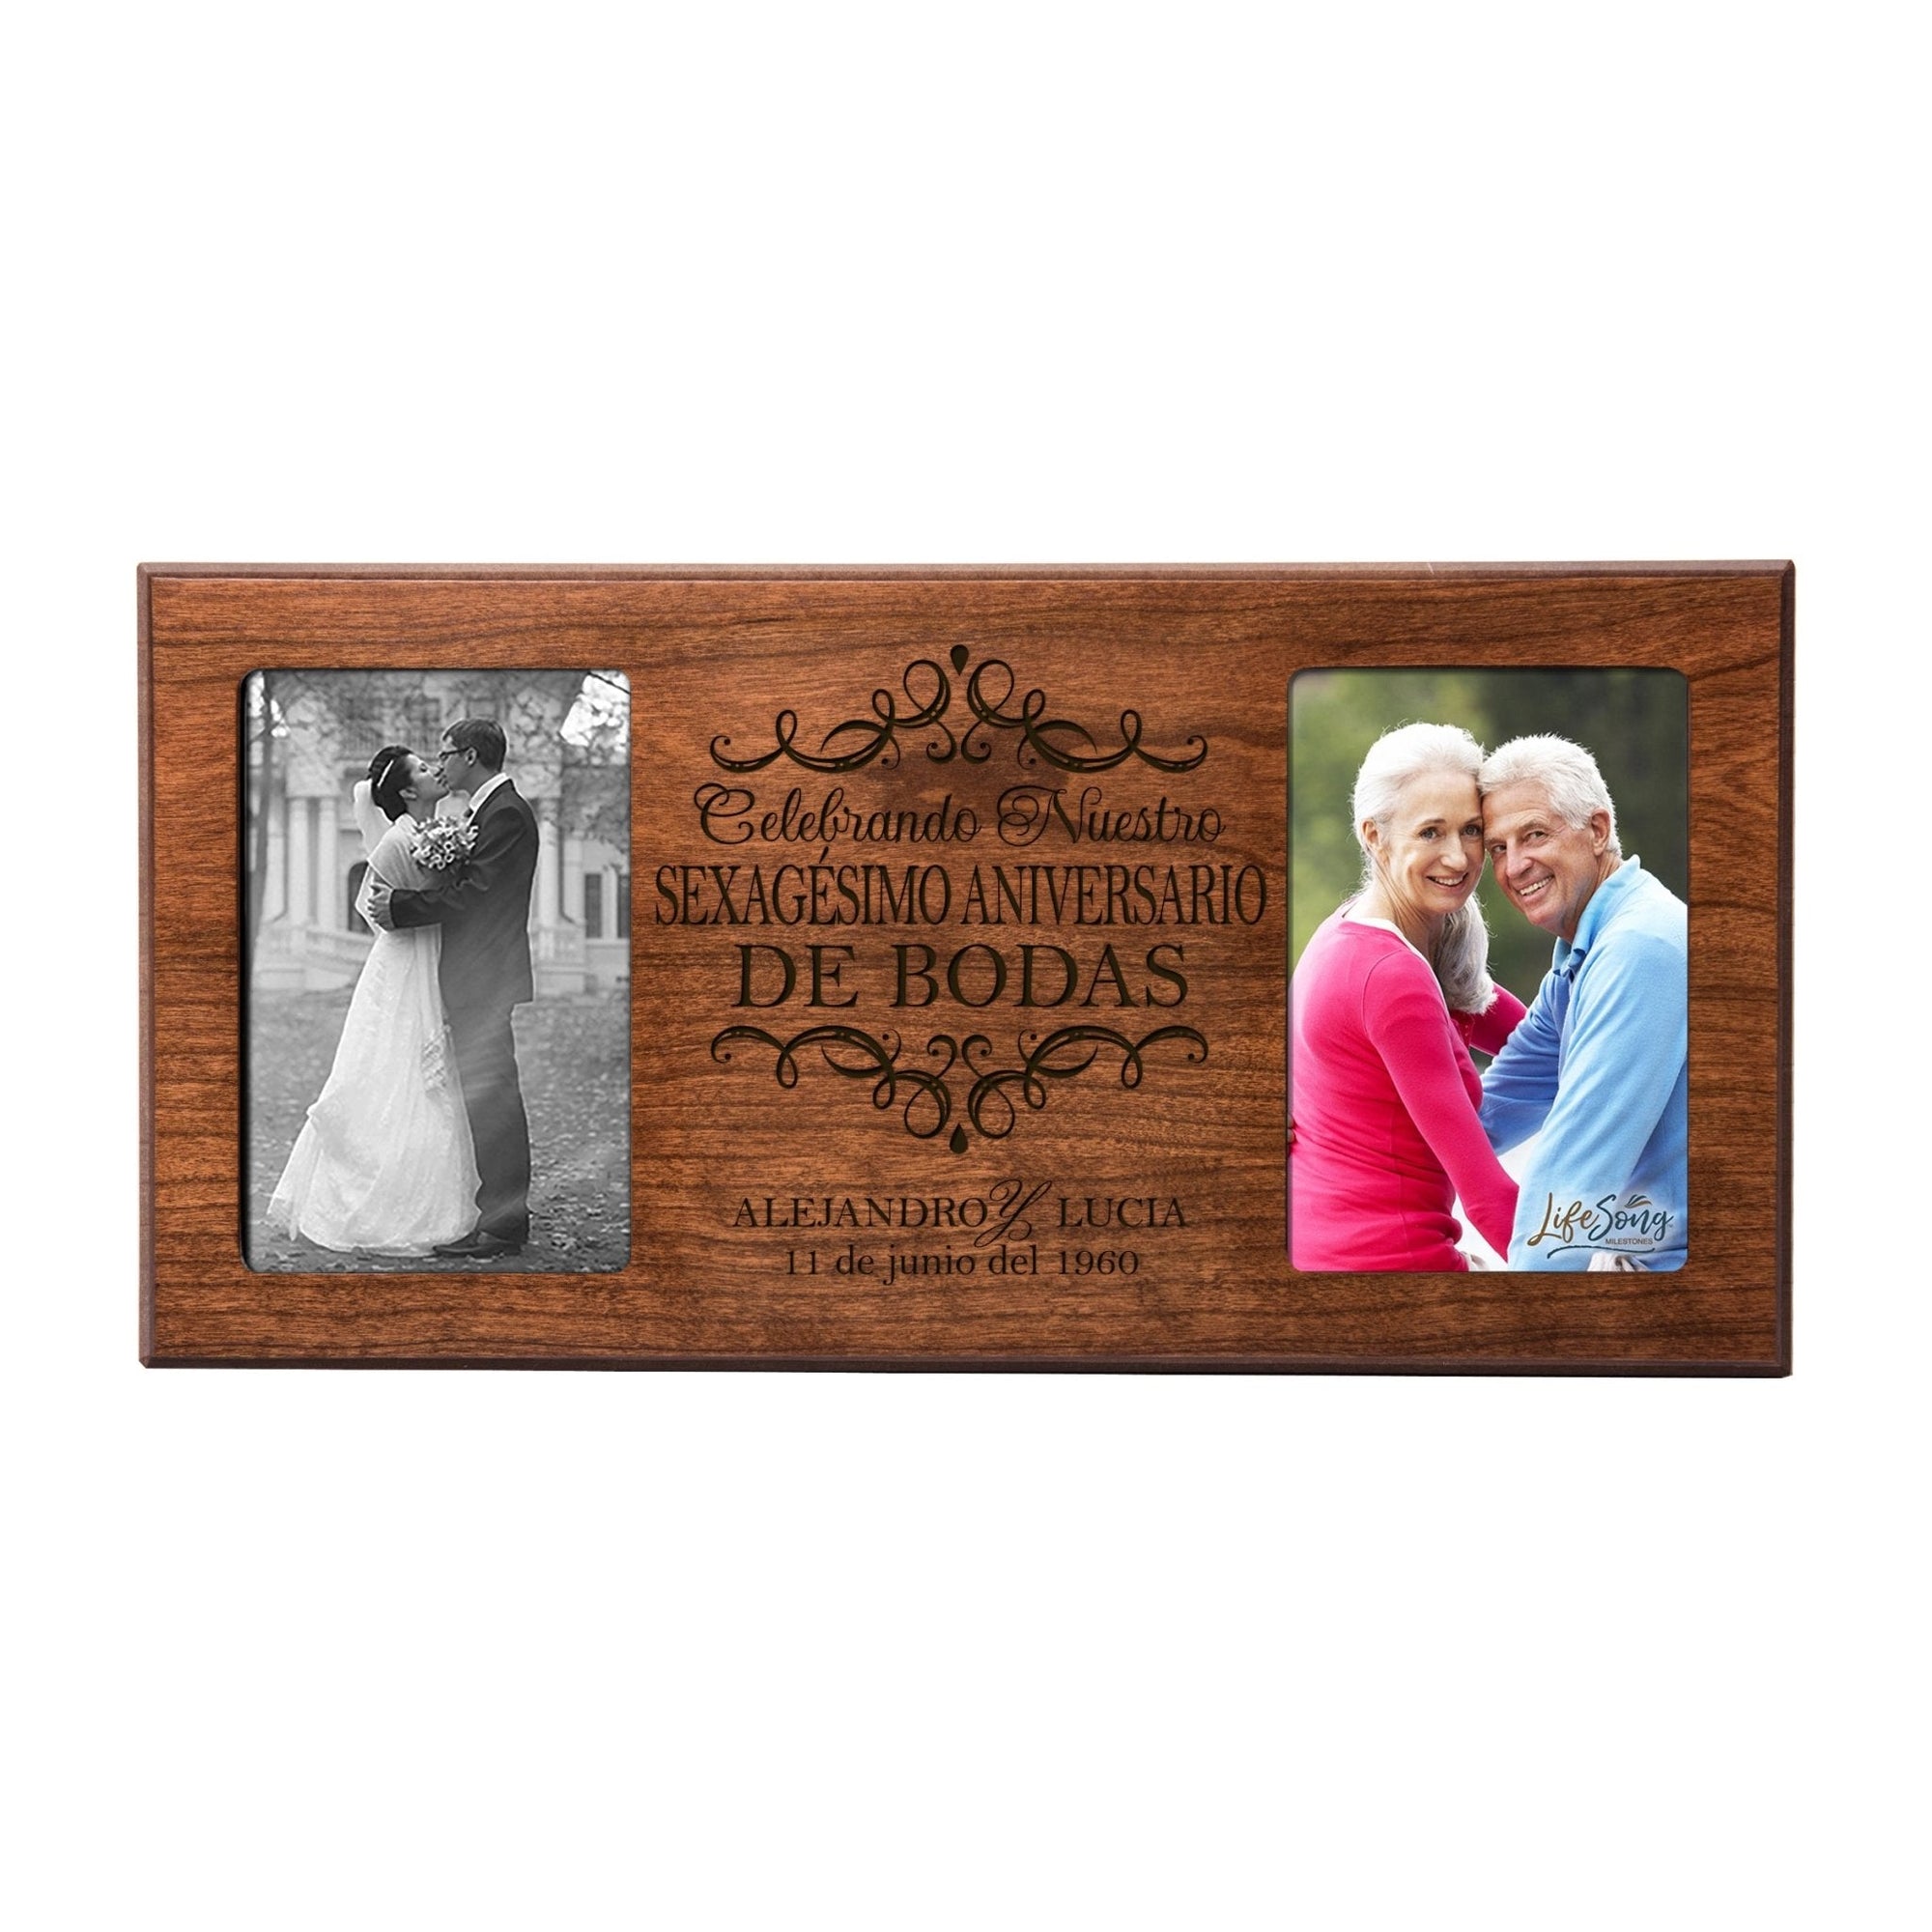 Personalized Picture Frame 60th Wedding Anniversary Spanish Gift Ideas